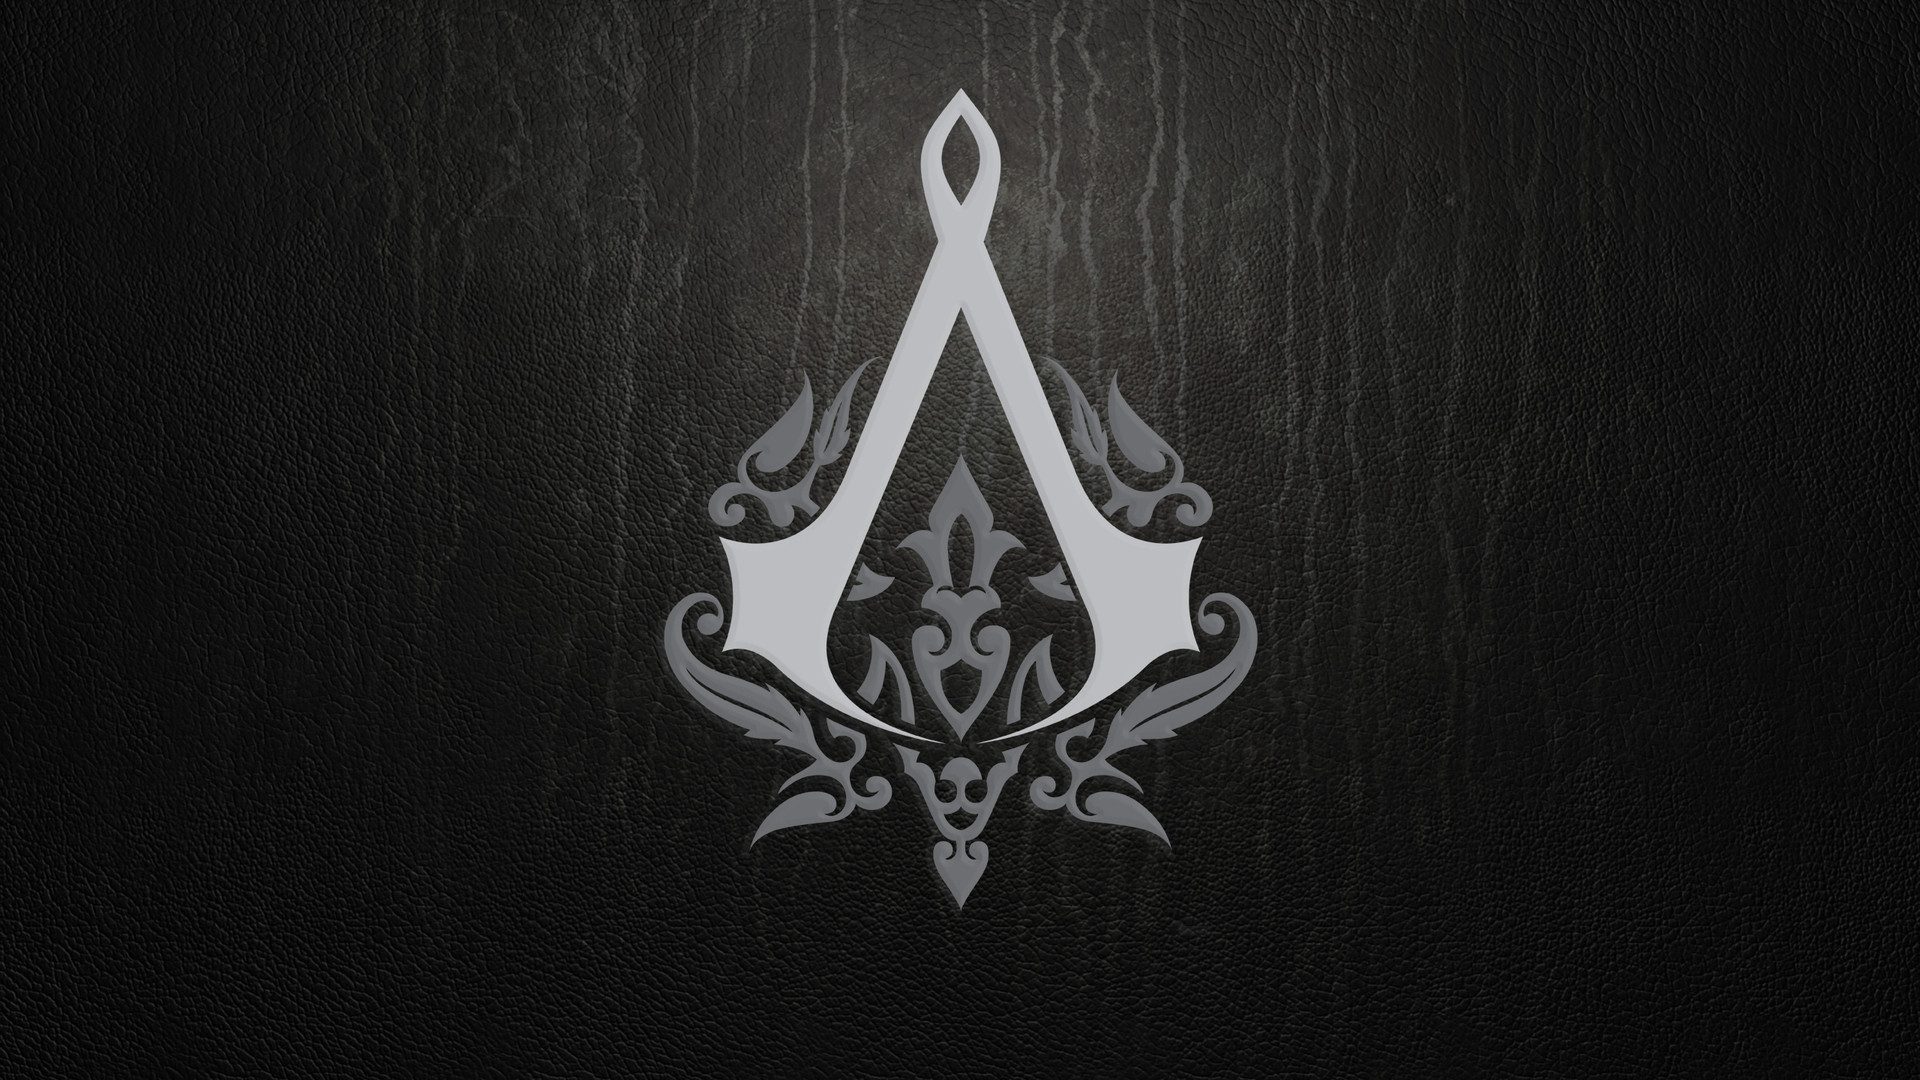 1920x1080 wallpaper by assassins the assassin s creed wiki assassins creed .